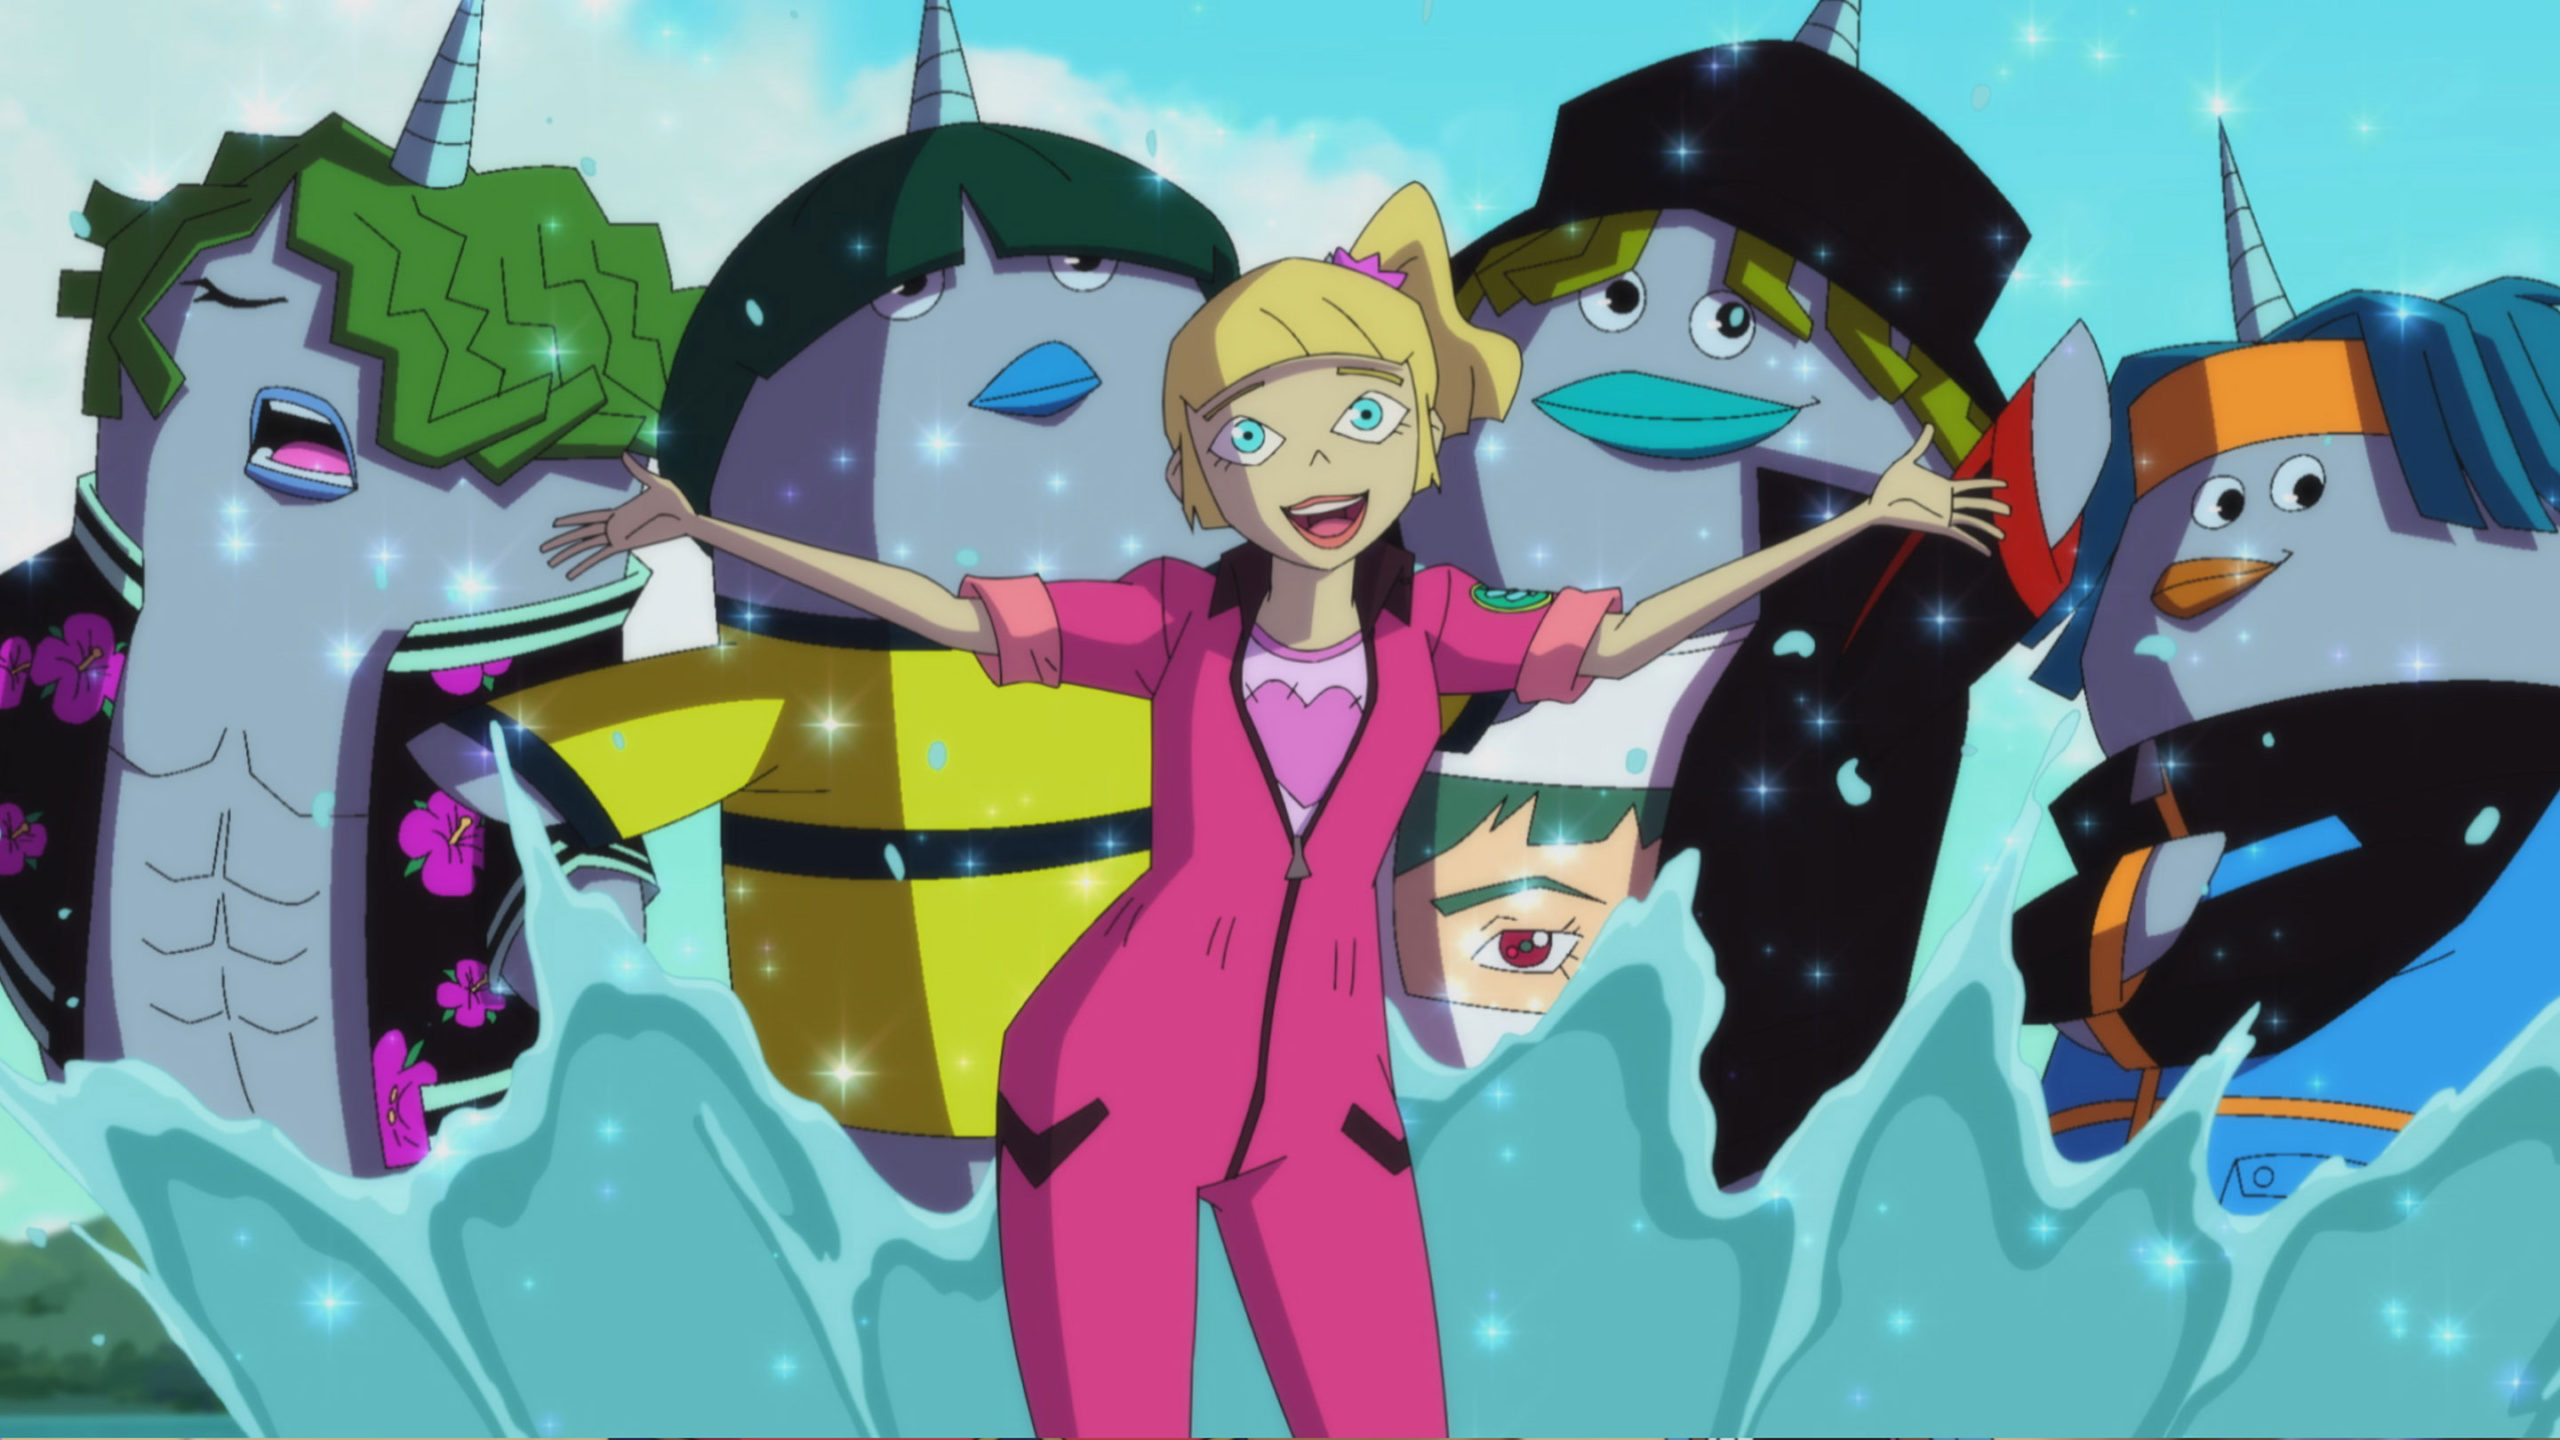 Doag dances with a group of narwhal mutes dressed in fashionable clothes. 